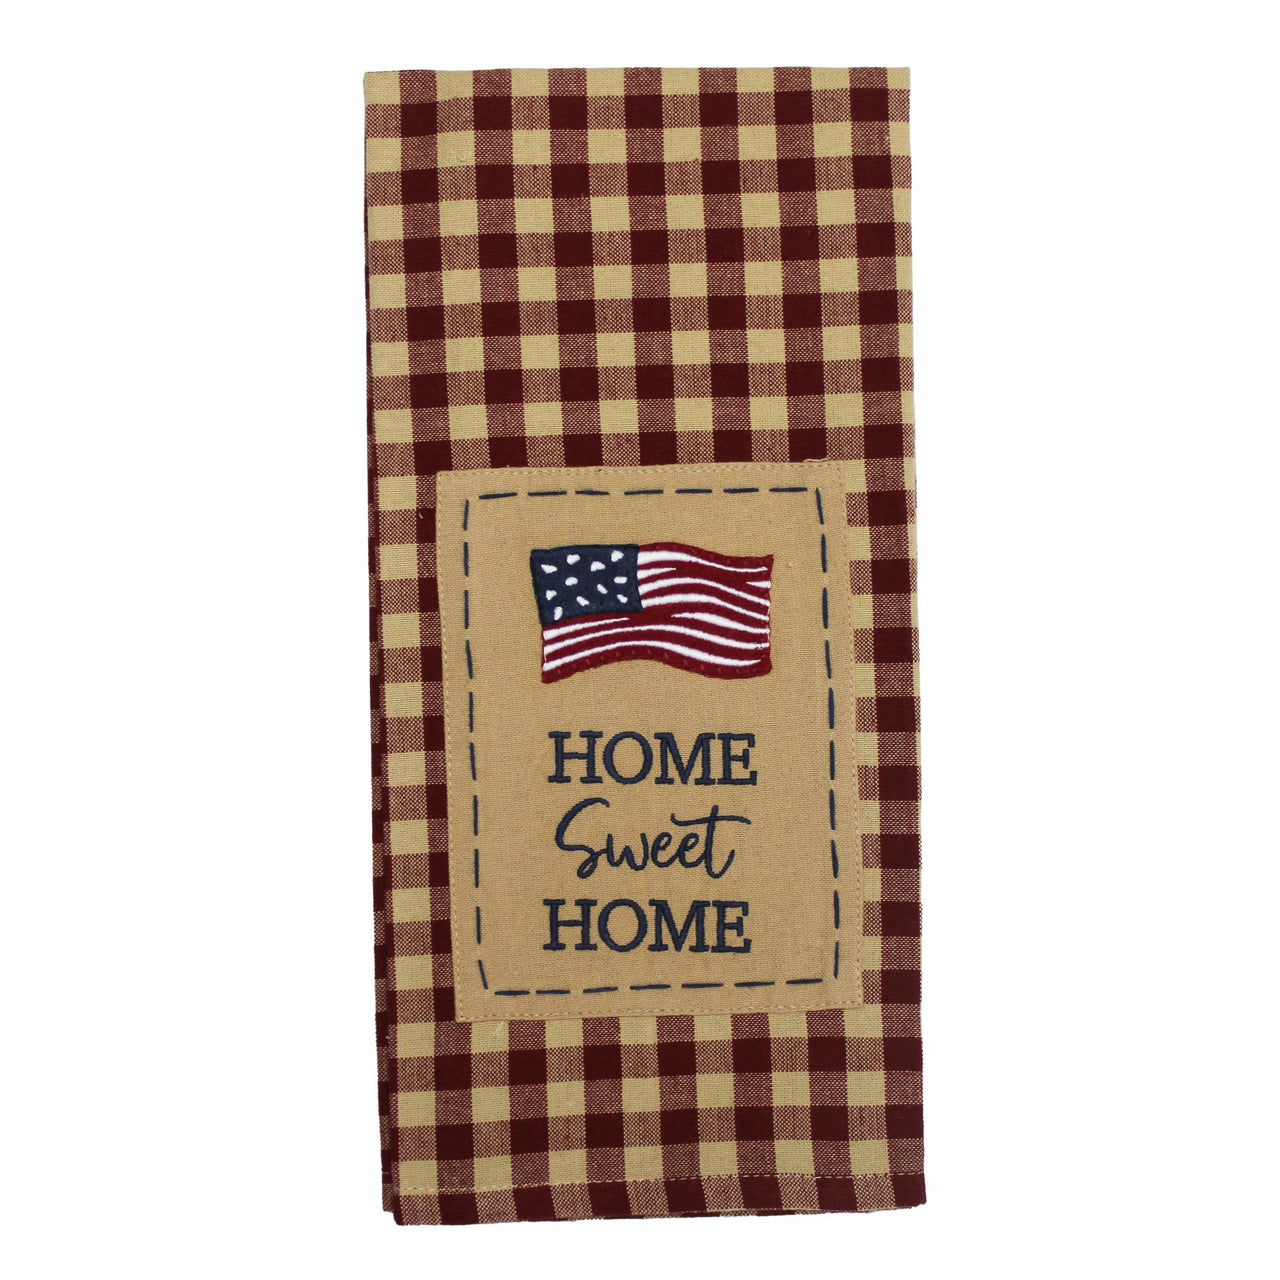 Home Sweet Home Flag Towel - Interiors by Elizabeth